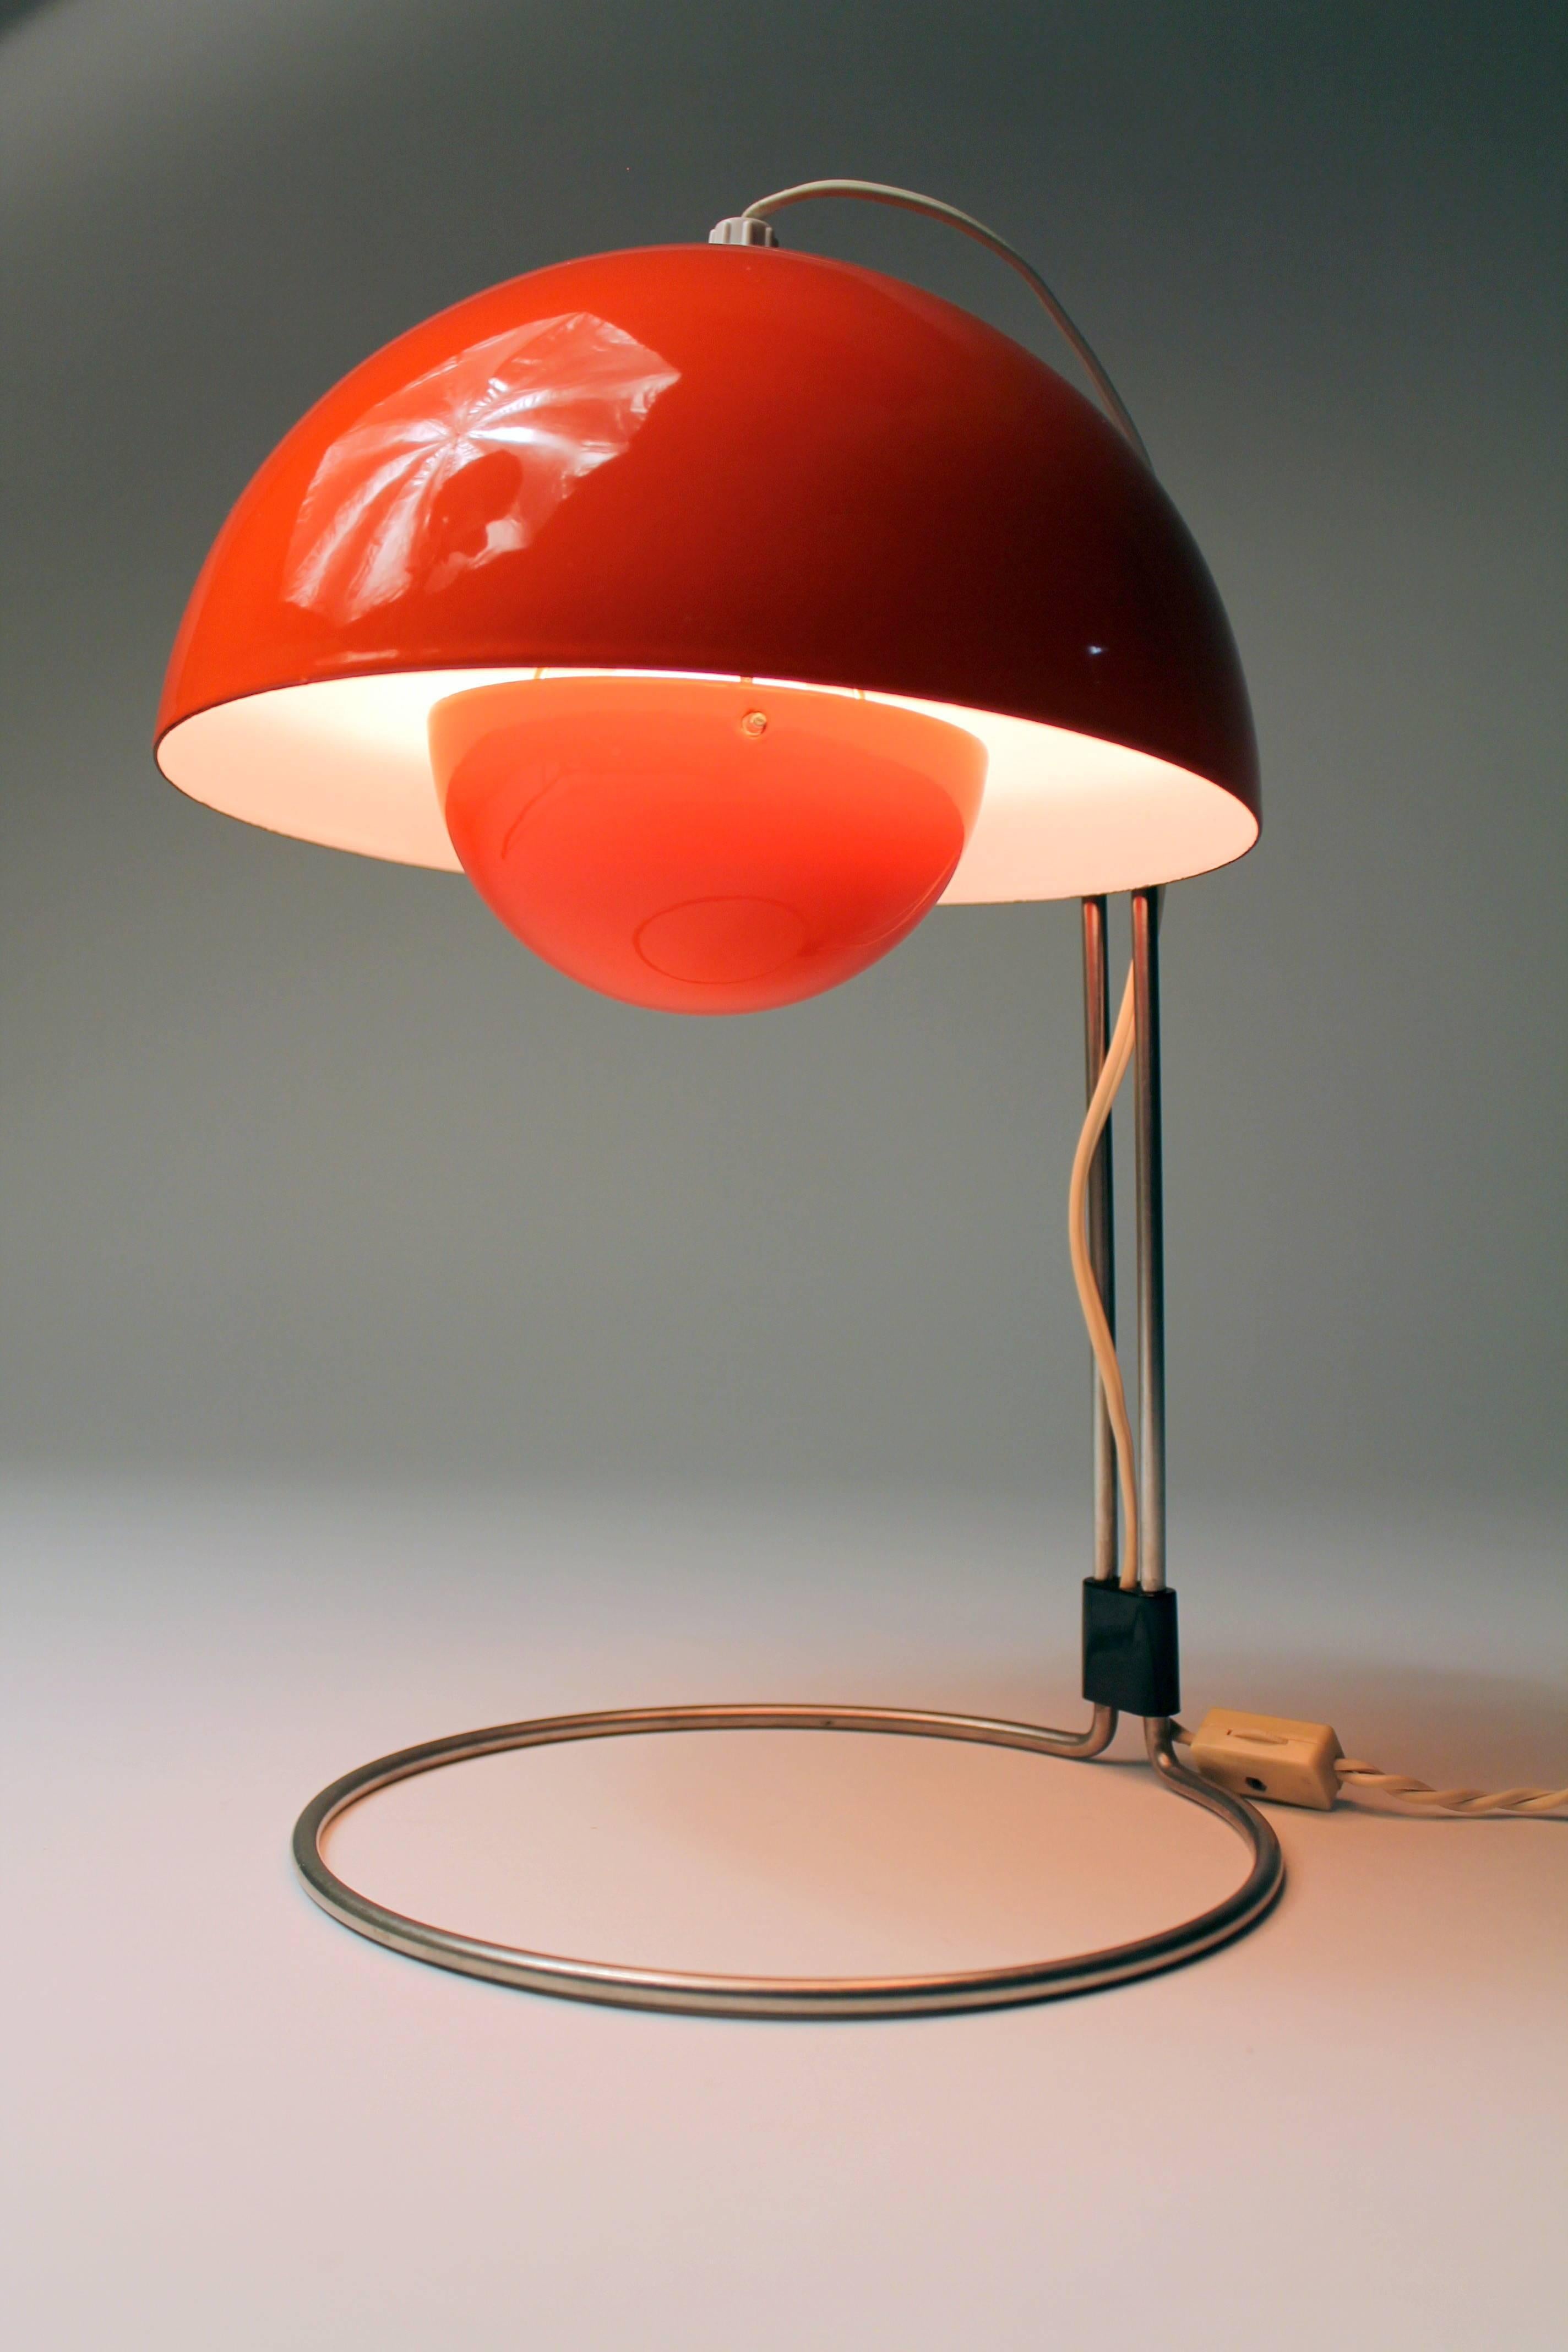 Rare color offered only in early edition .  

Wire, rotating switch and wall plug are original.

Interesting fact : A concern  of  Verner Panton while designing most of his lamps was to avoid direct light contact with the eyes. In this particular